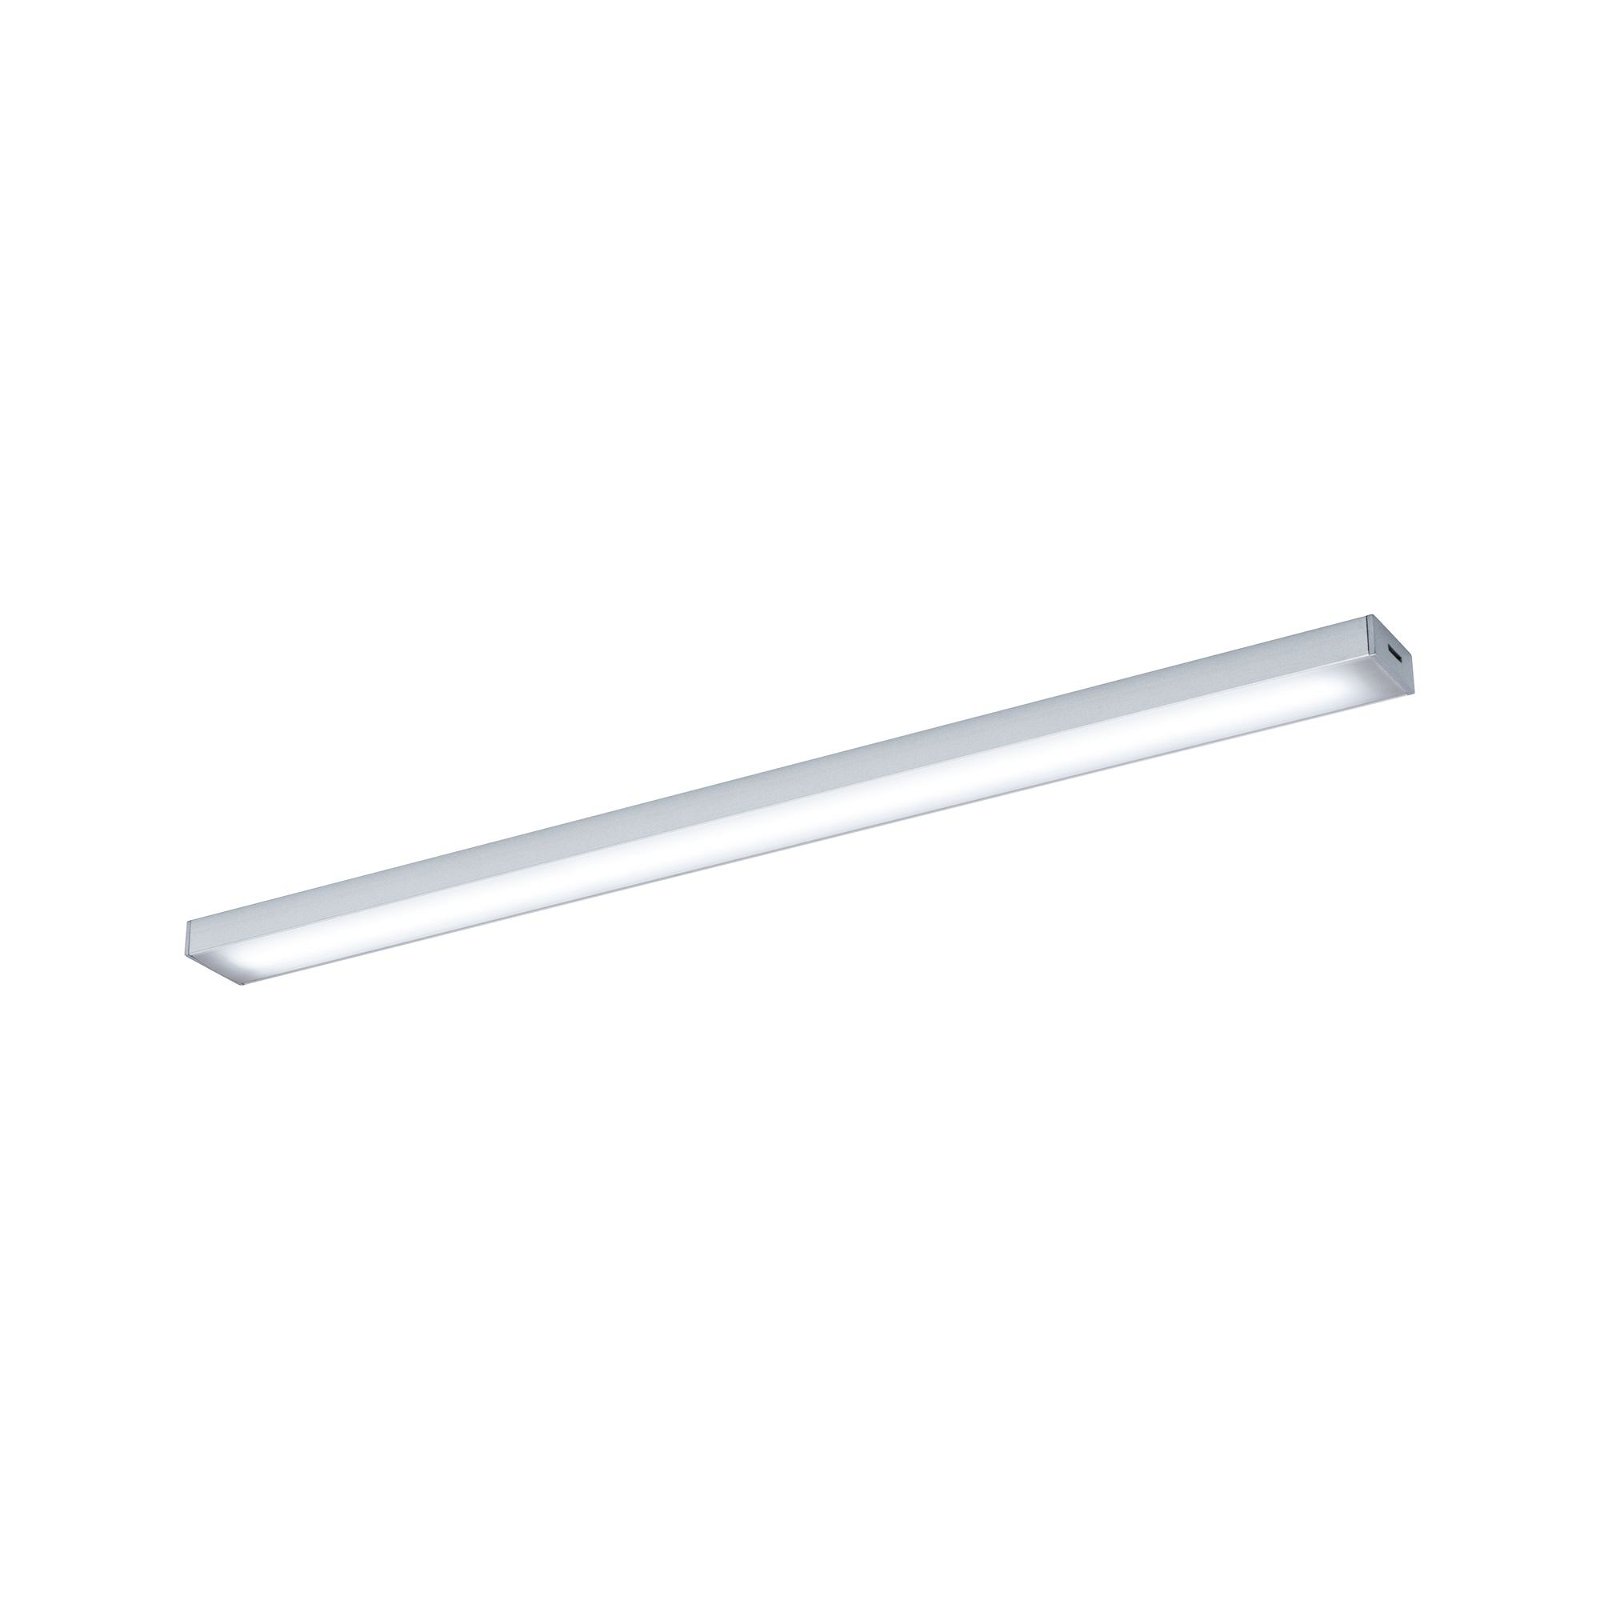 Clever Connect Spot LED Barre Tunable White 3,5W Chrome mat